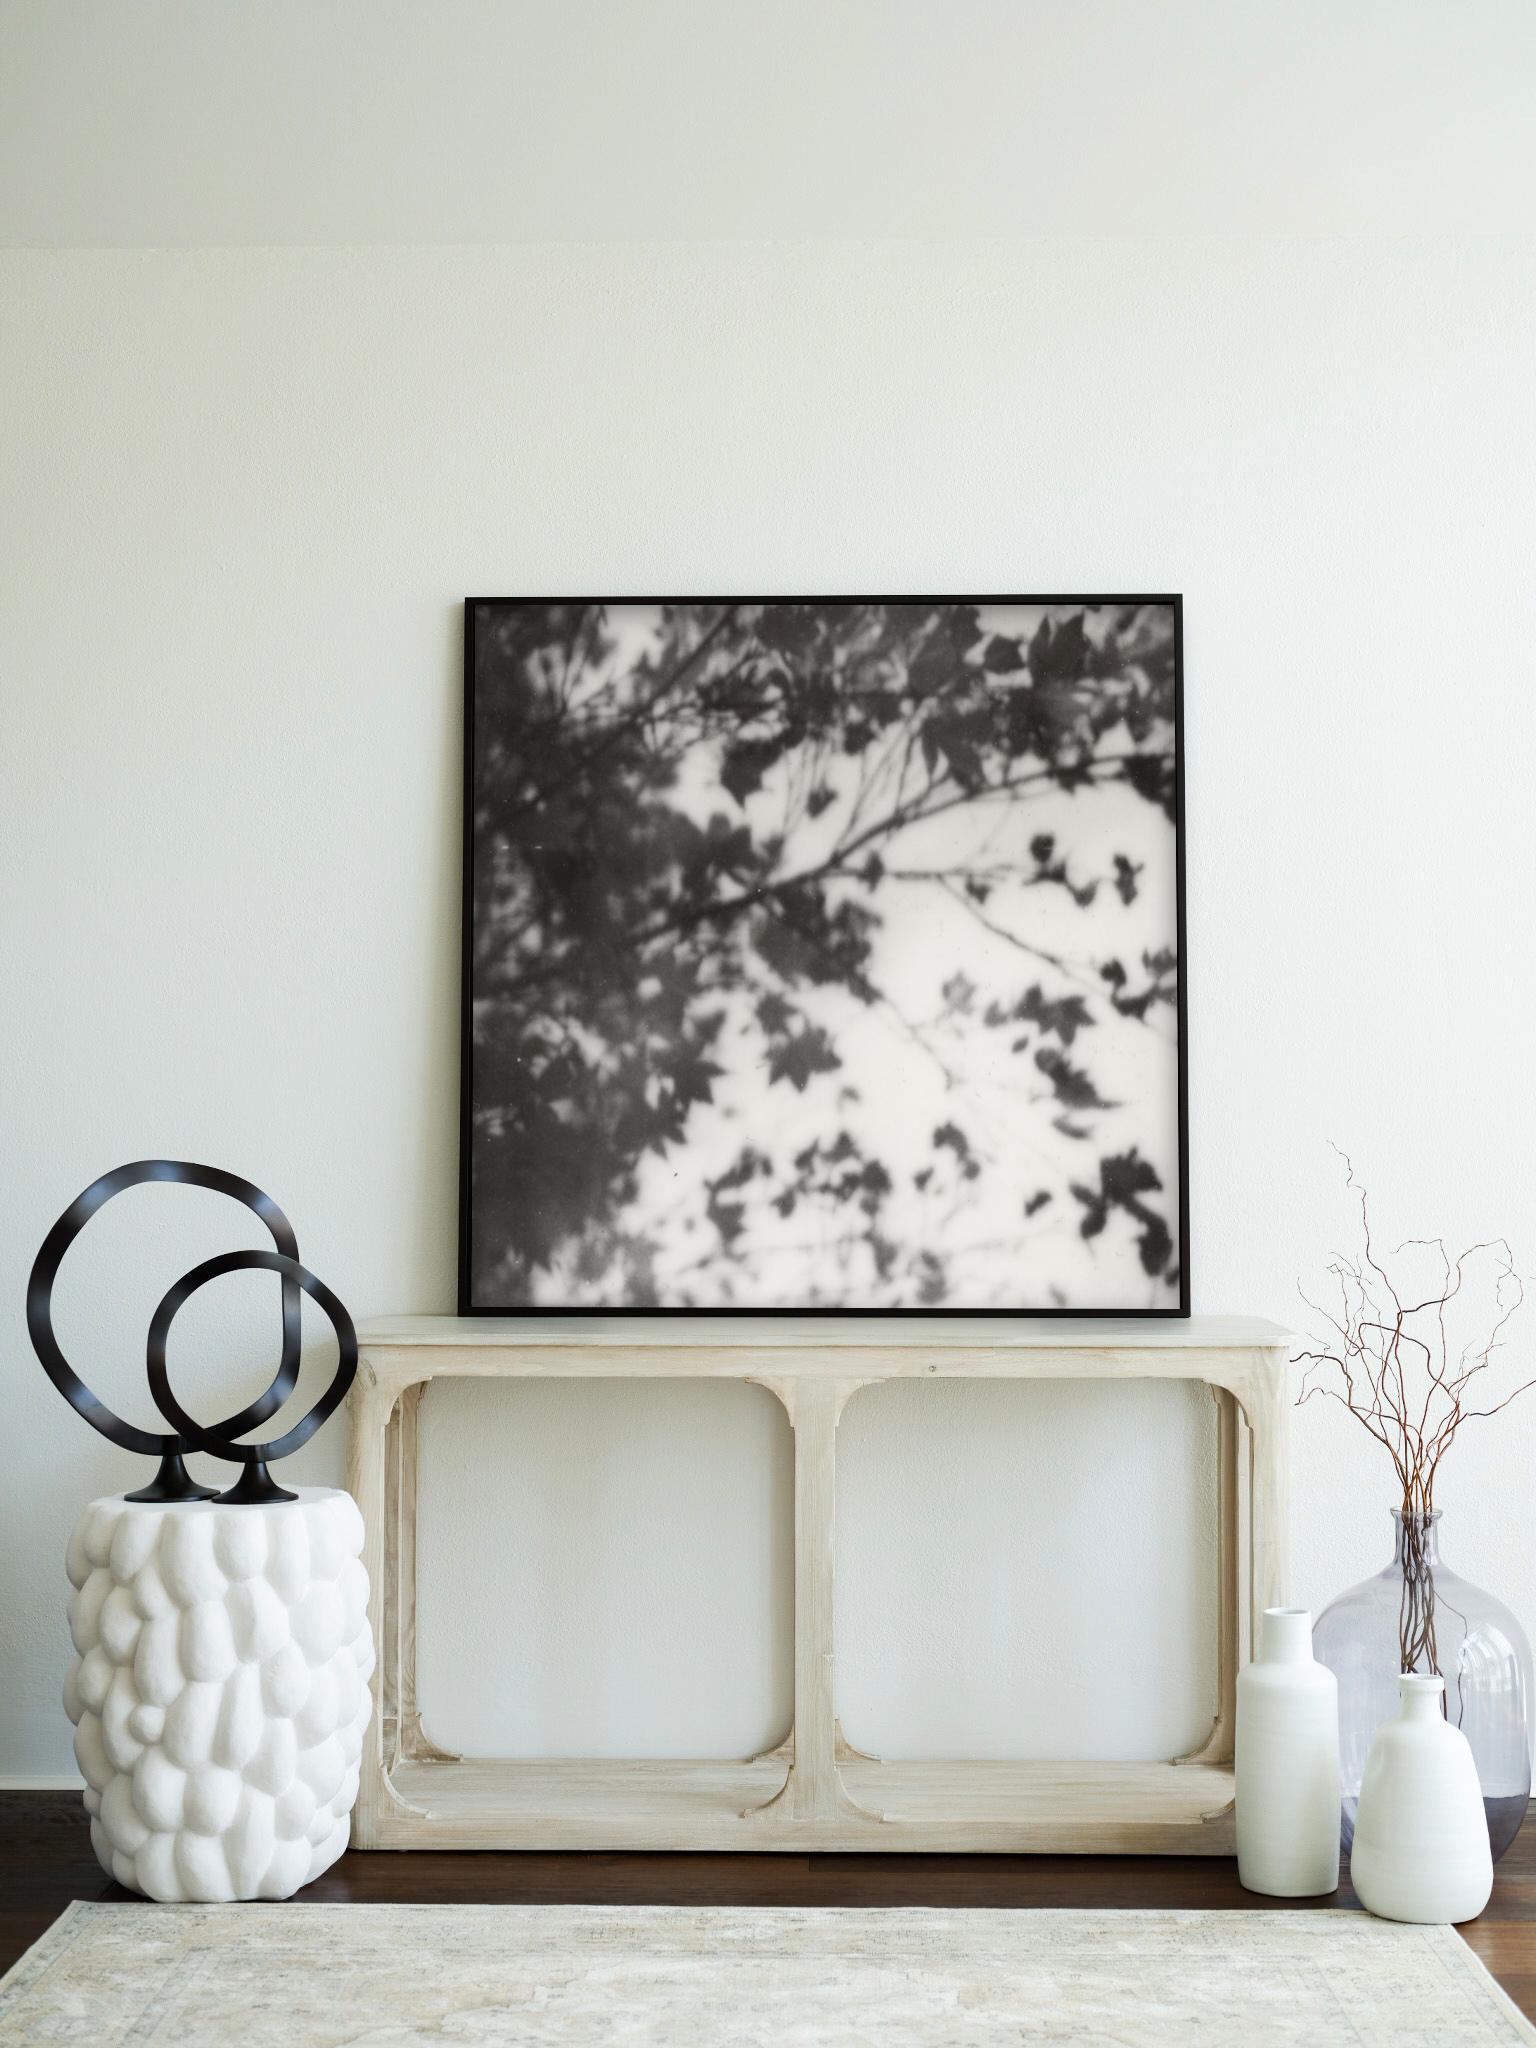 Three Dreams - Still Life Black and White Film Photographic Print Framed - Gray Abstract Photograph by Pia Clodi